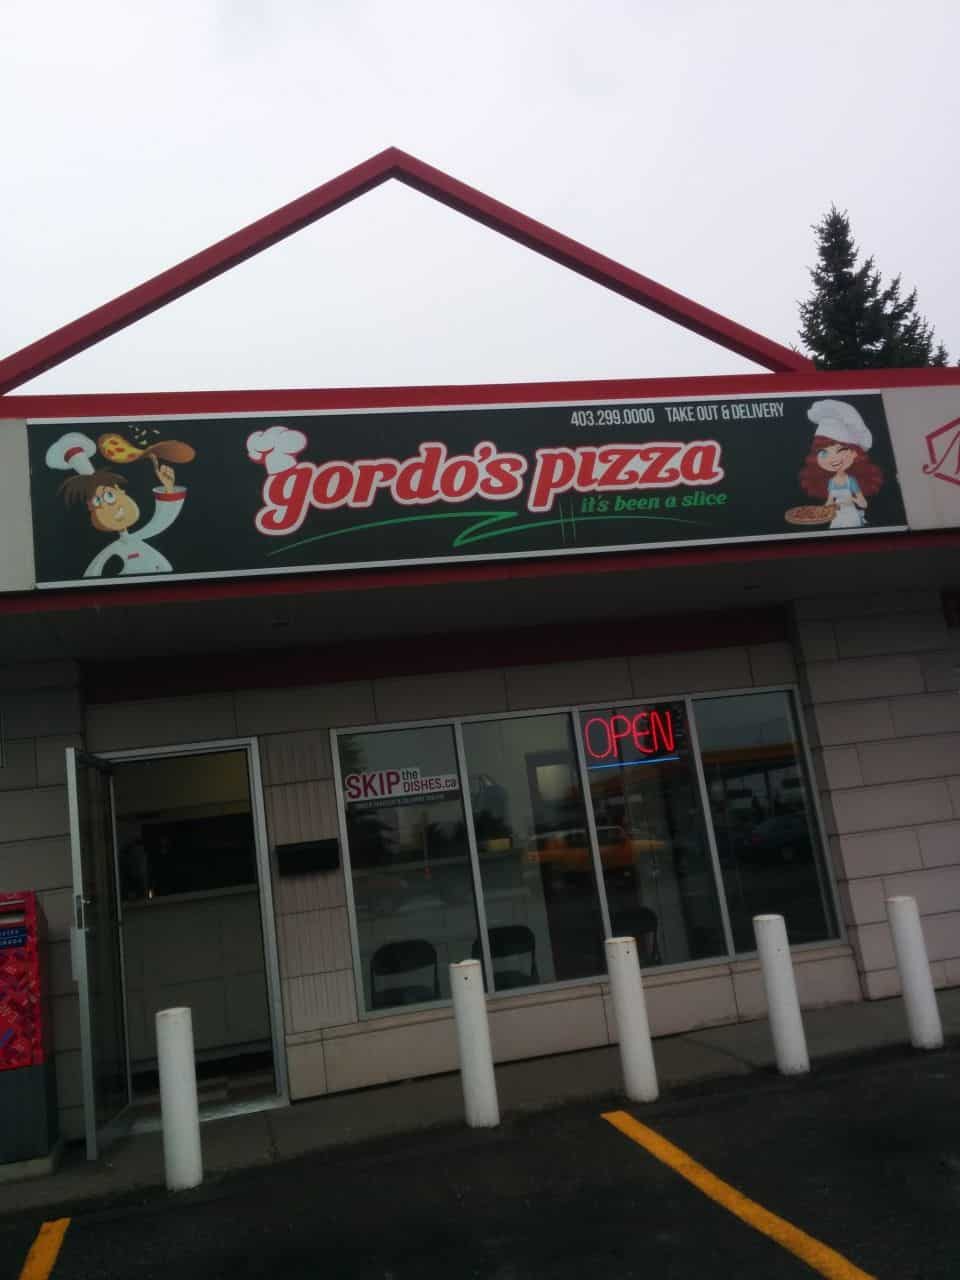 Gordo's Pizza- Update- Now closed - No longer open in Calgary, but boy was their pizza good